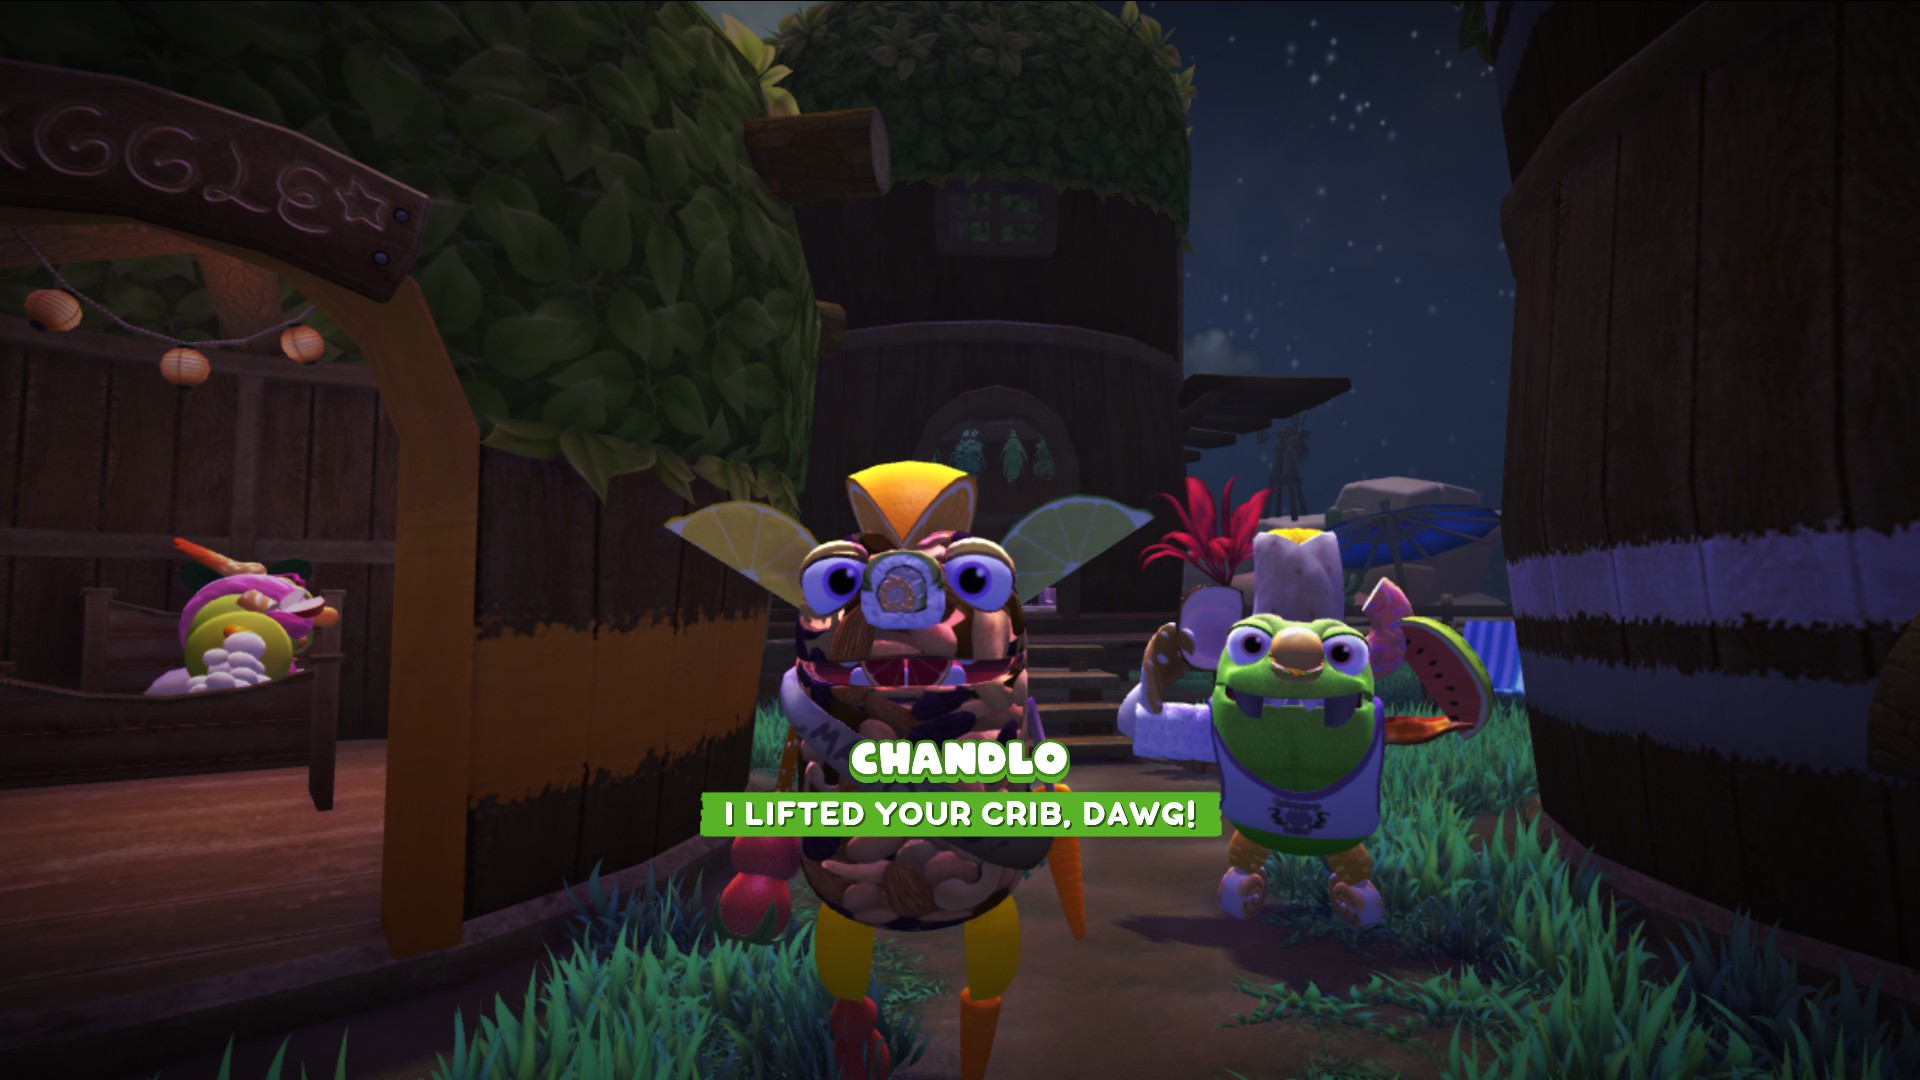 Screenshot from Bugsnax, Filbo Fiddlepie and Chandlo Funkbun are standing in front of your hut in Snaxburg. The dialogue on the screen is spoken by Chandlo, saying: I LIFTED YOUR CRIB, DAWG!